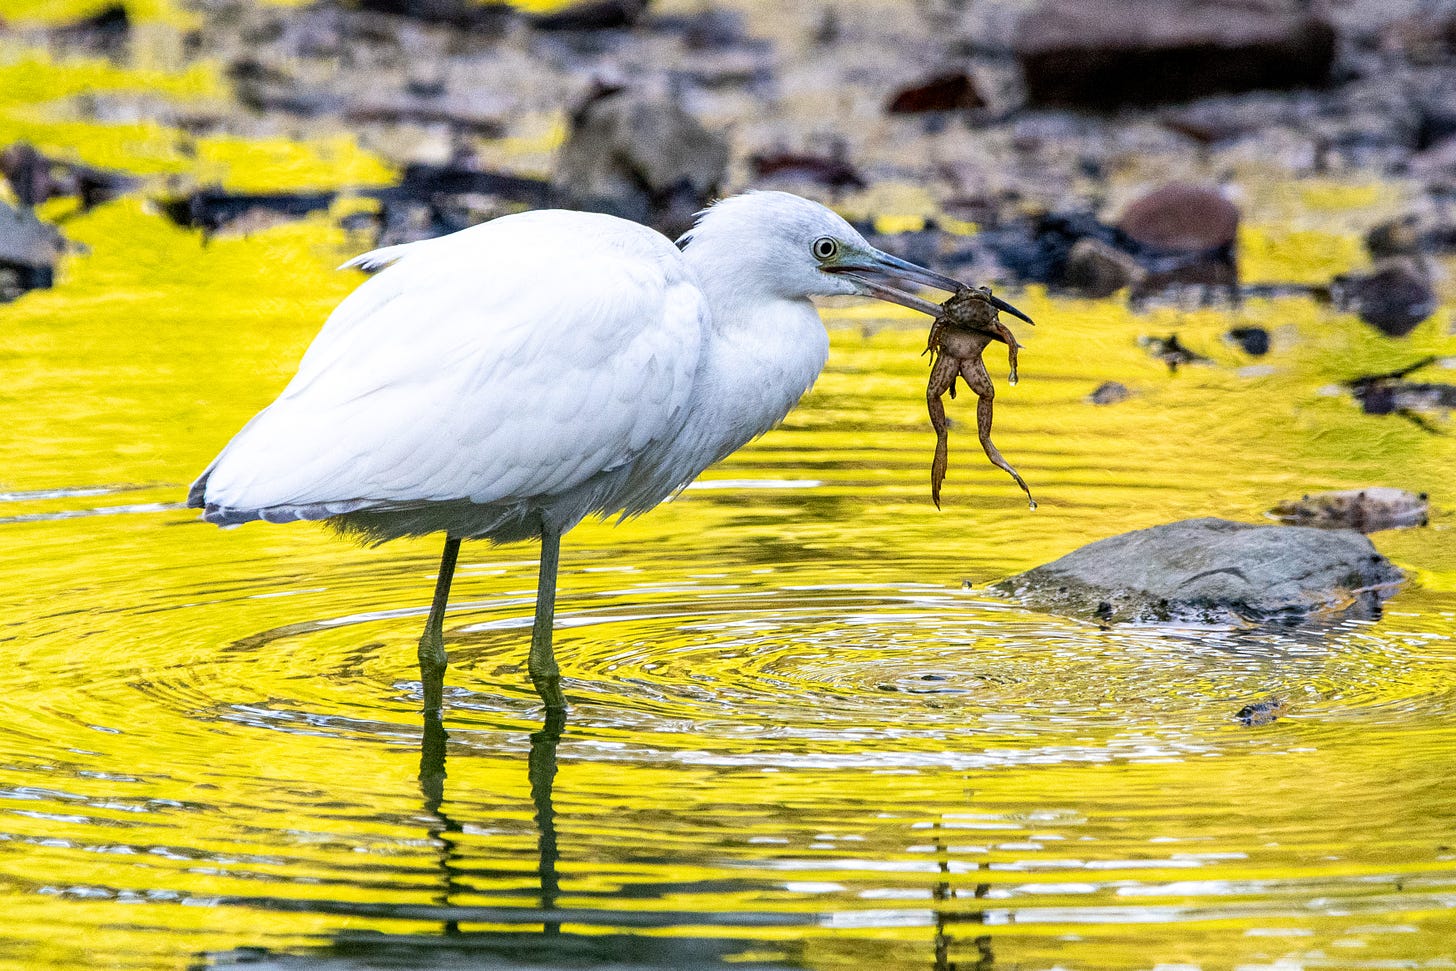 A little blue heron holds a frog in its pincer-like beak, over a chartreuse pool of water